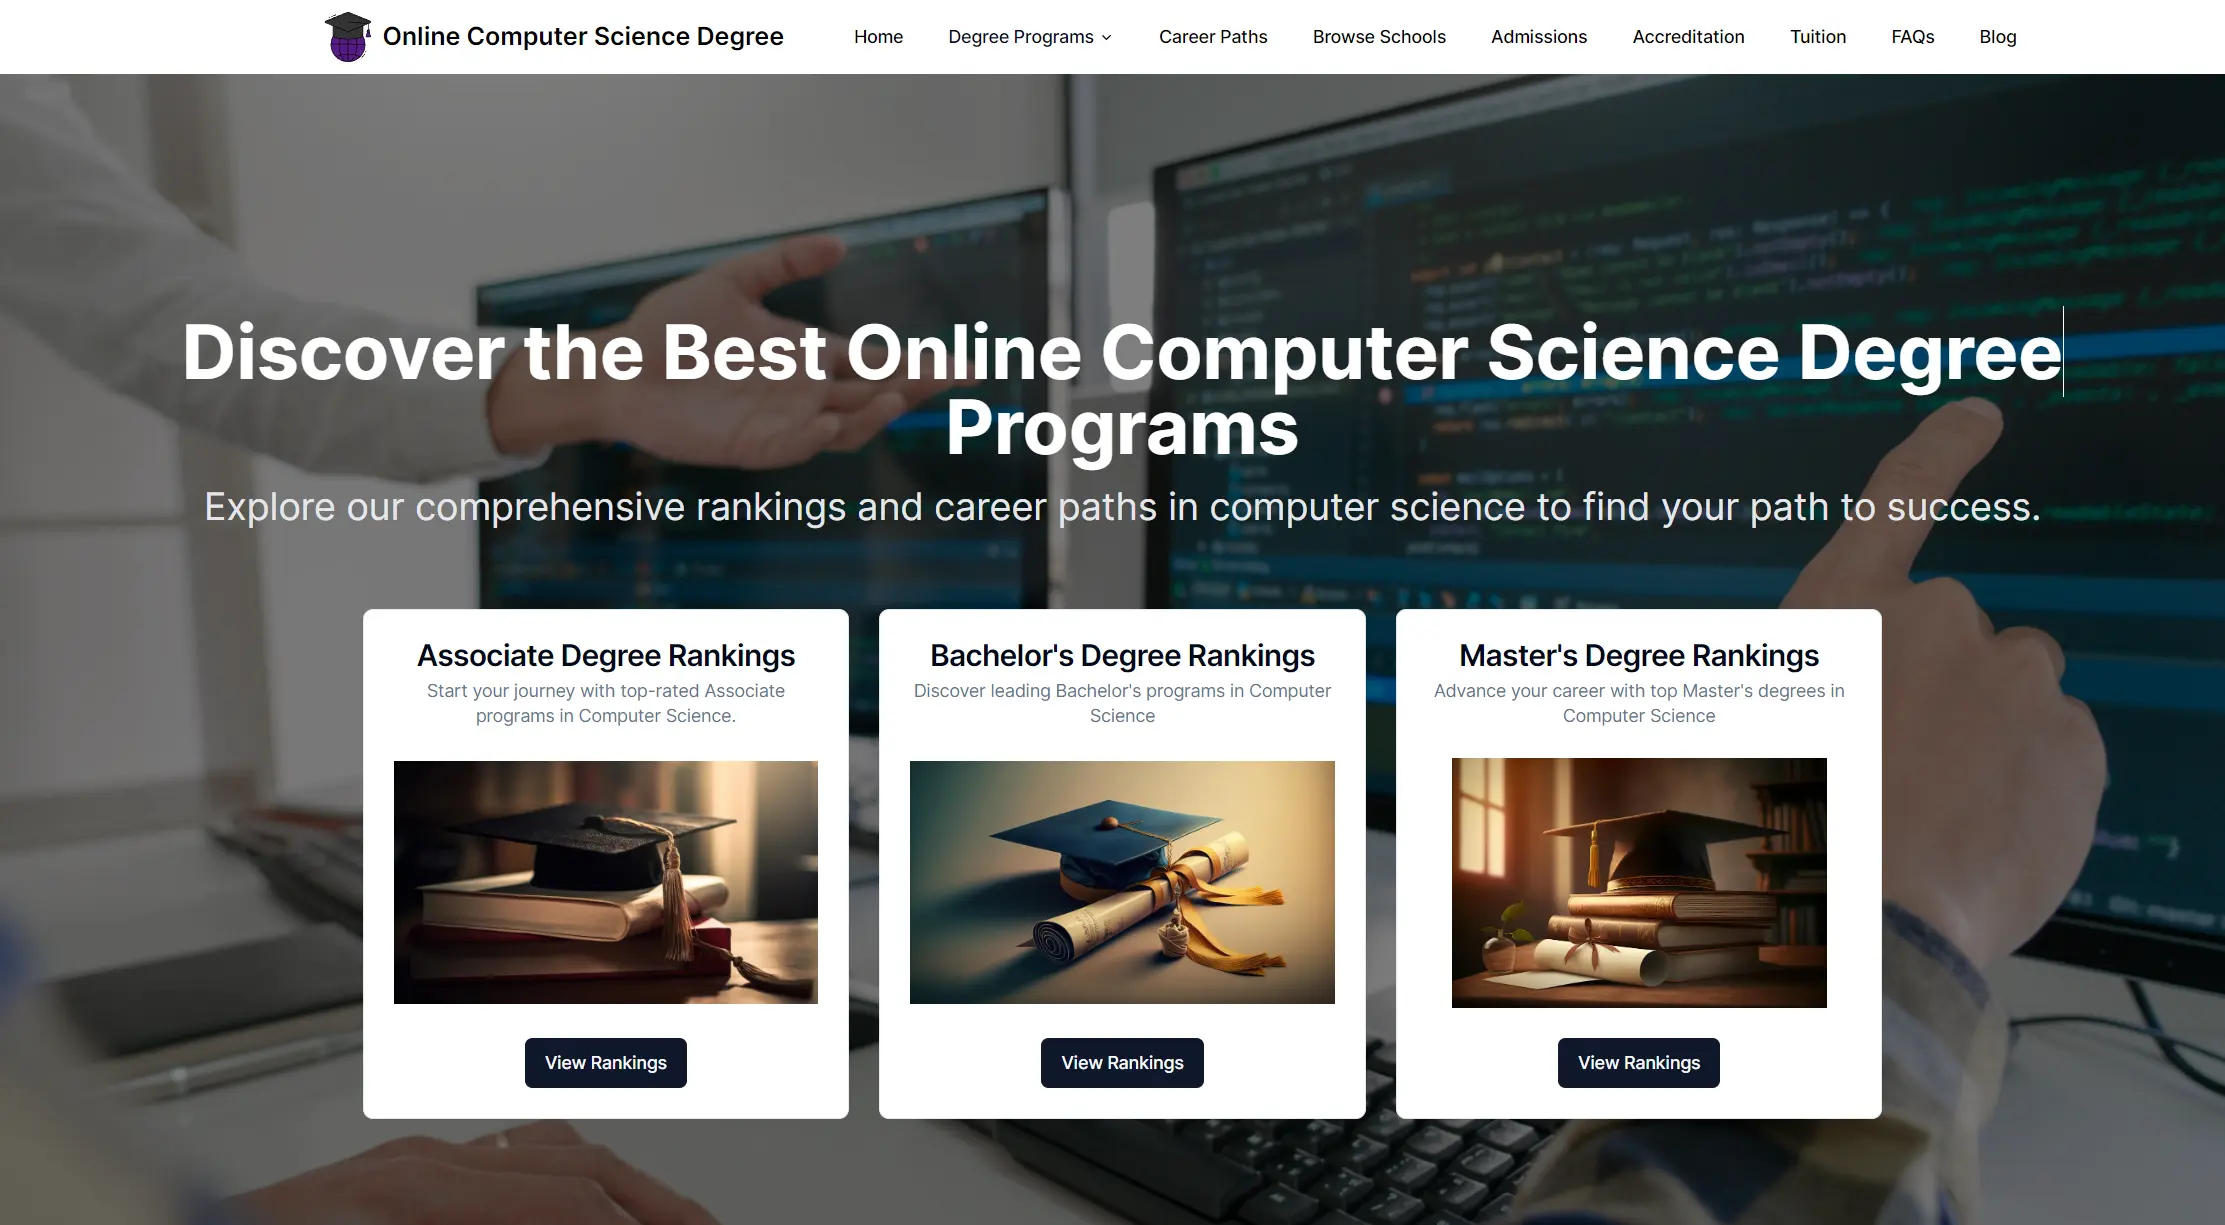 Online Computer Science Degrees site thumbnail